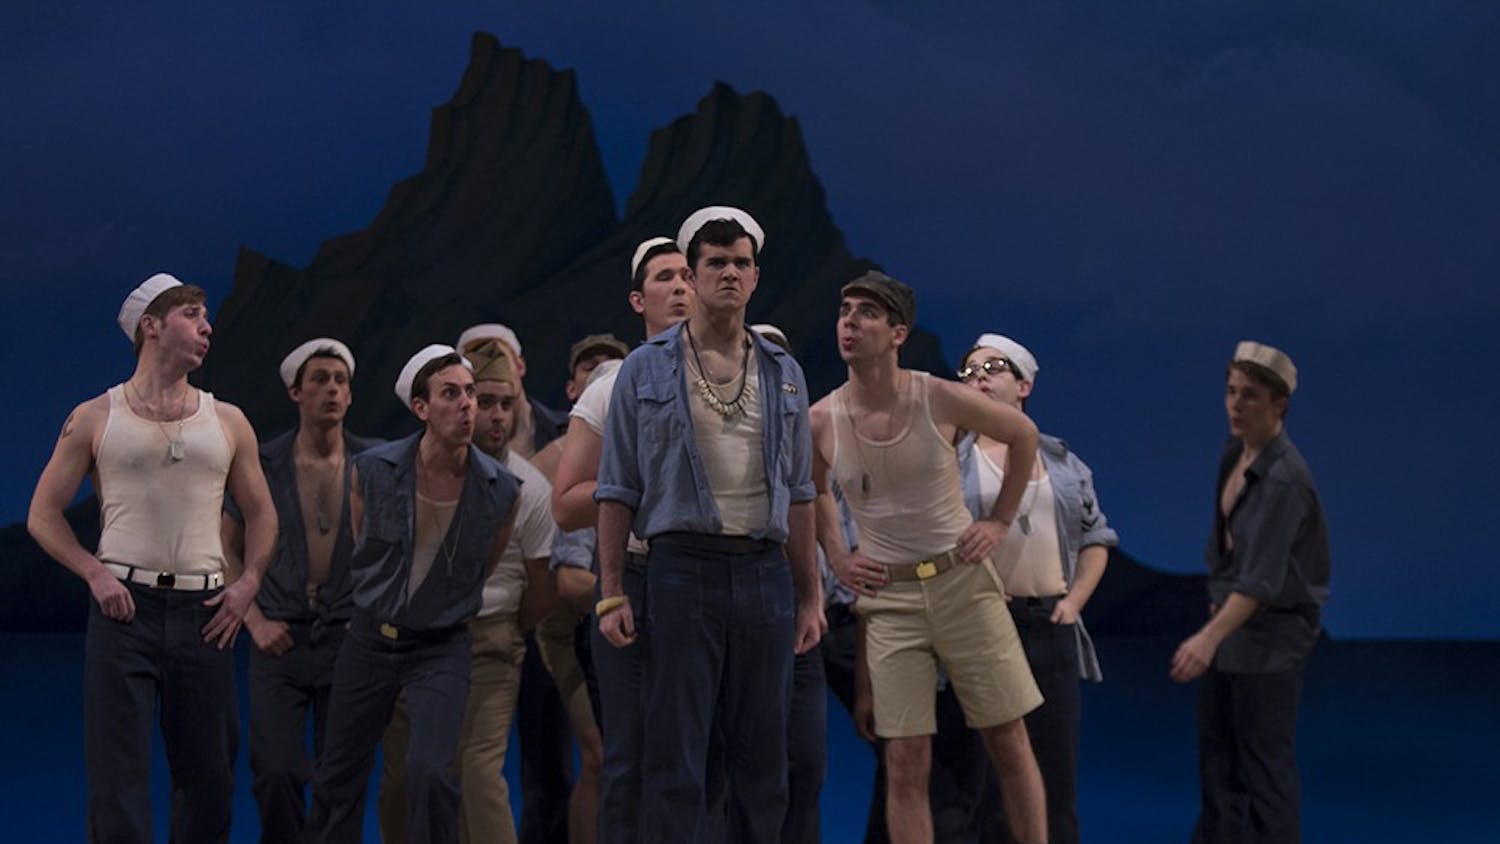 Casts act in the dress rehearsal of "South Pacific" in the Musical Arts Center on Thursday night. "South Pacific" opens Friday.